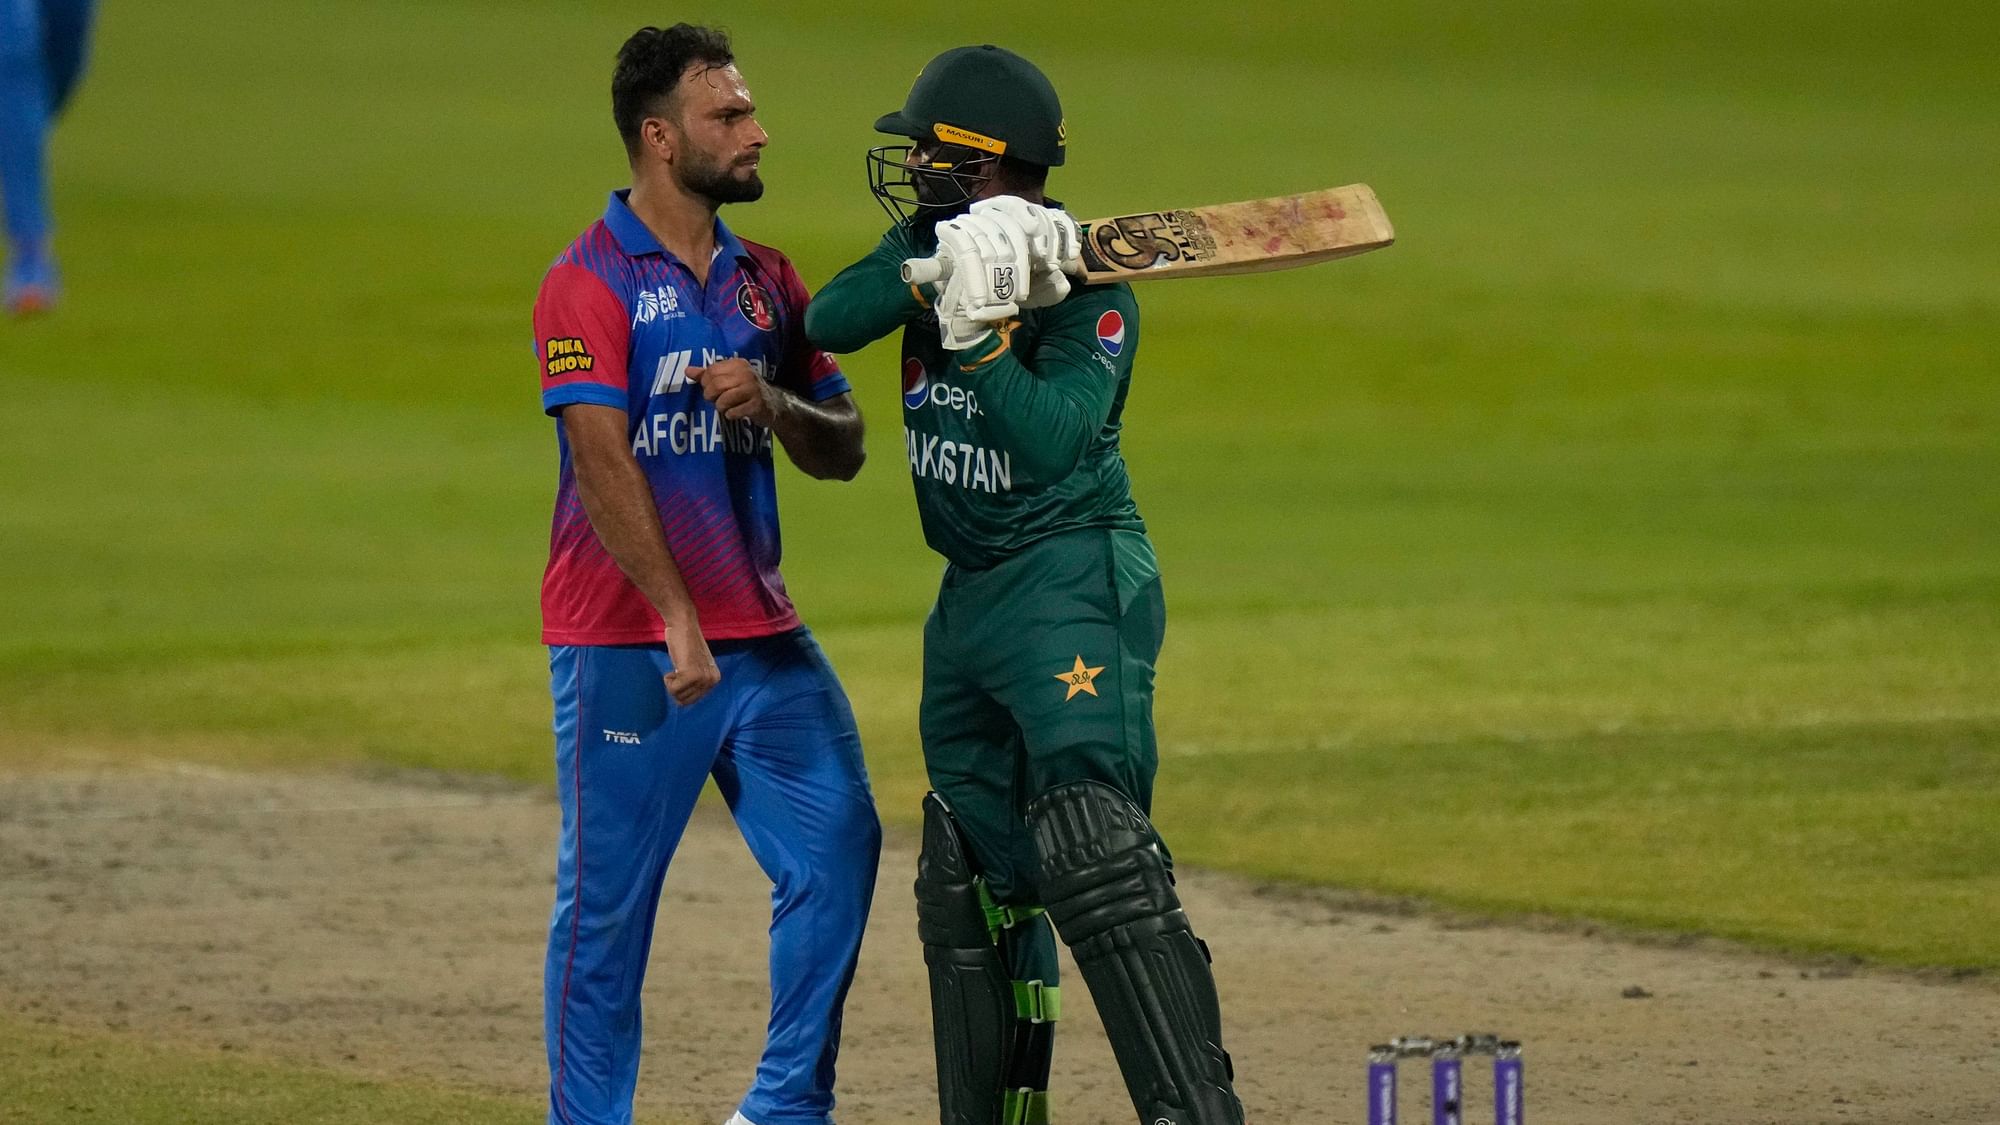 <div class="paragraphs"><p>Asia Cup 2022: Pakistan's Asif Ali and Afghanistan's Fareed Ahmed were involved in an altercation.</p></div>